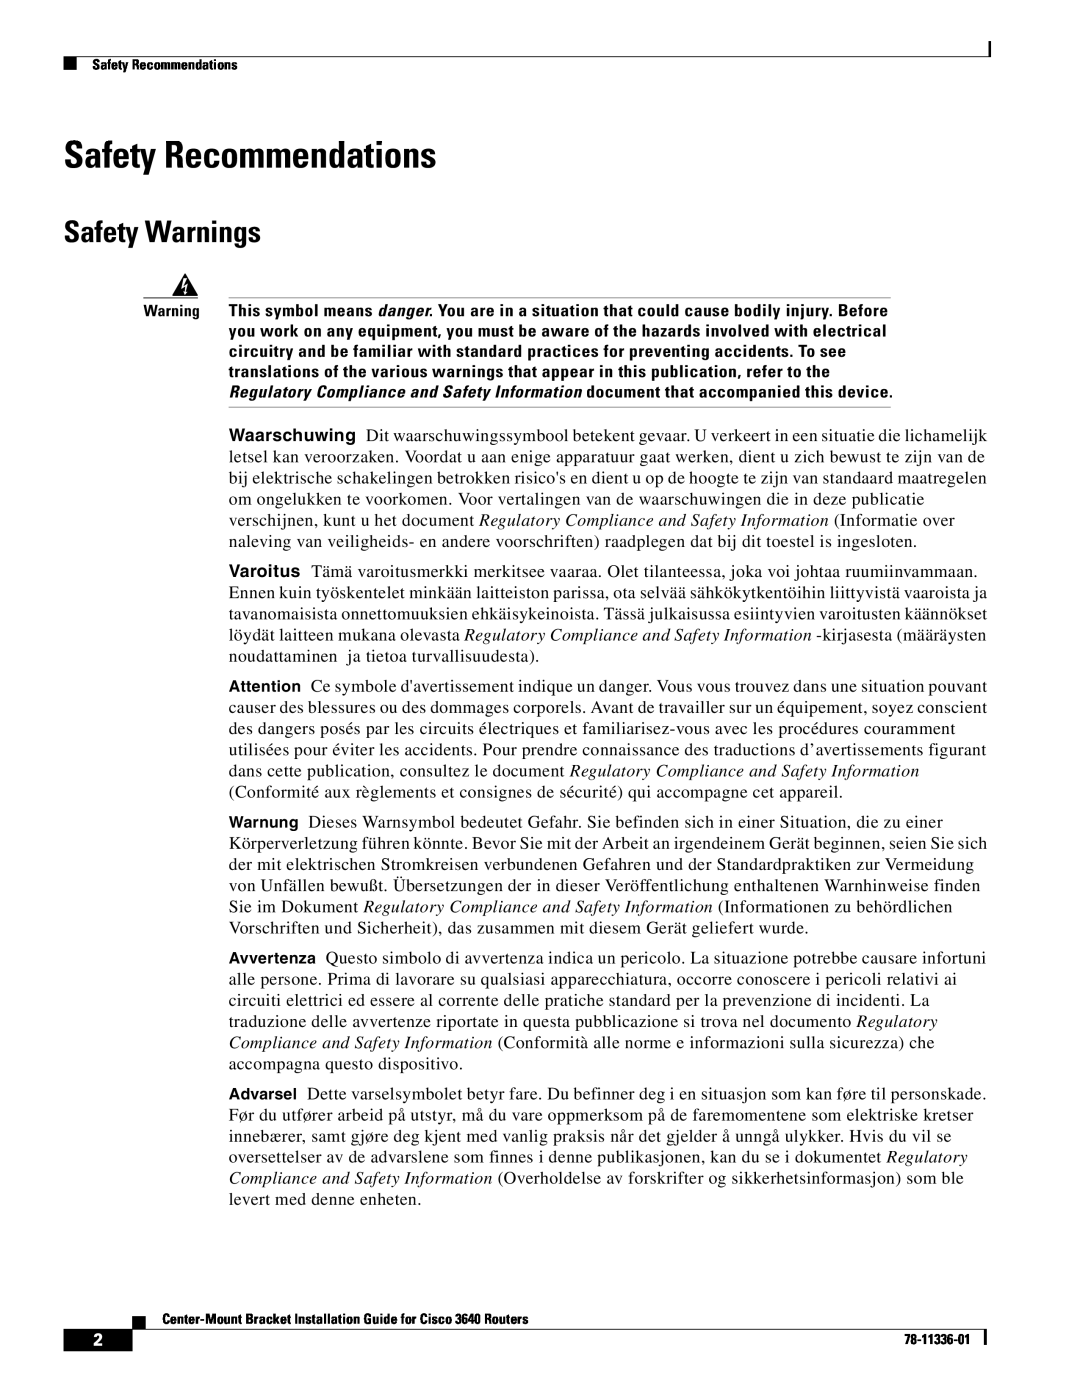 Cisco Systems 3640 manual Safety Recommendations, Safety Warnings 